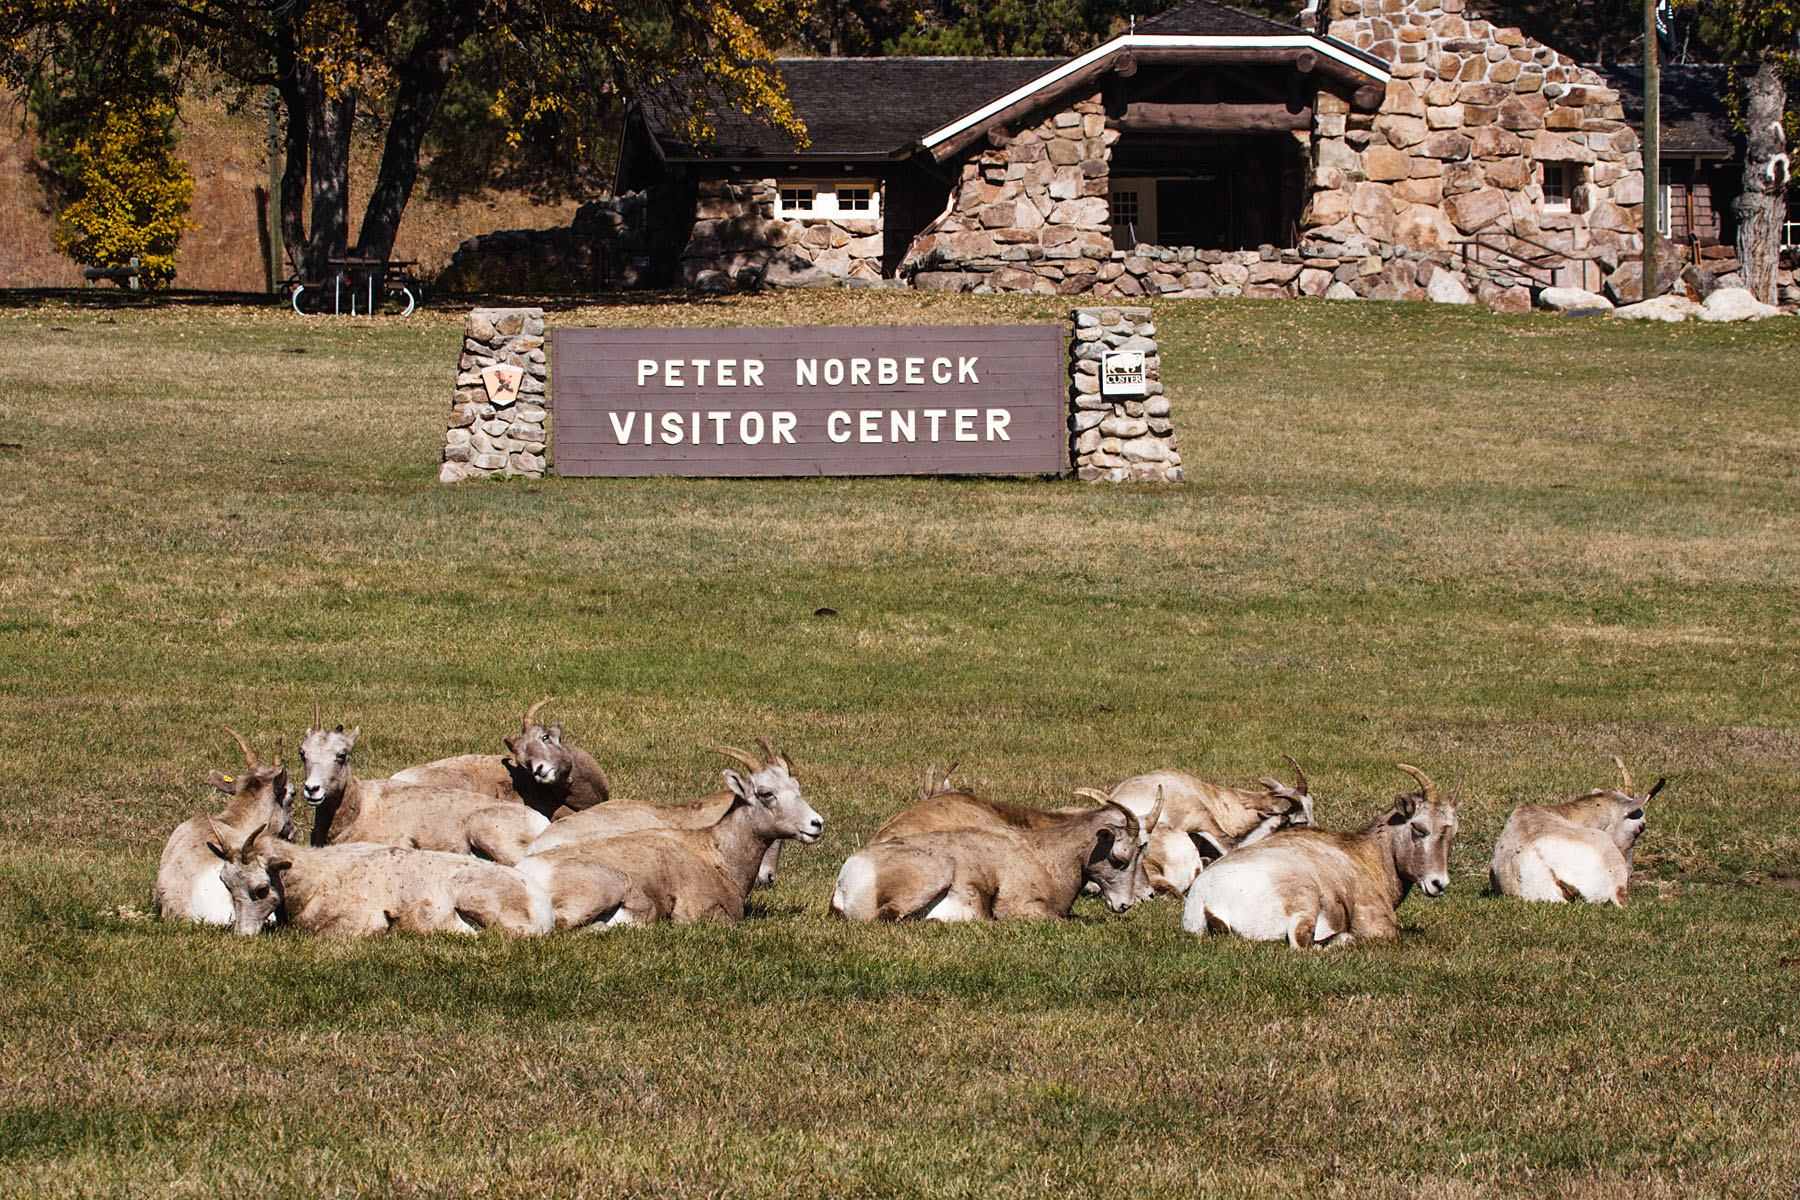 Rocky Mountain Bighorn ewes on the lawn of Norbeck Visitor Center, Custer State Park, SD.  Click for next photo.